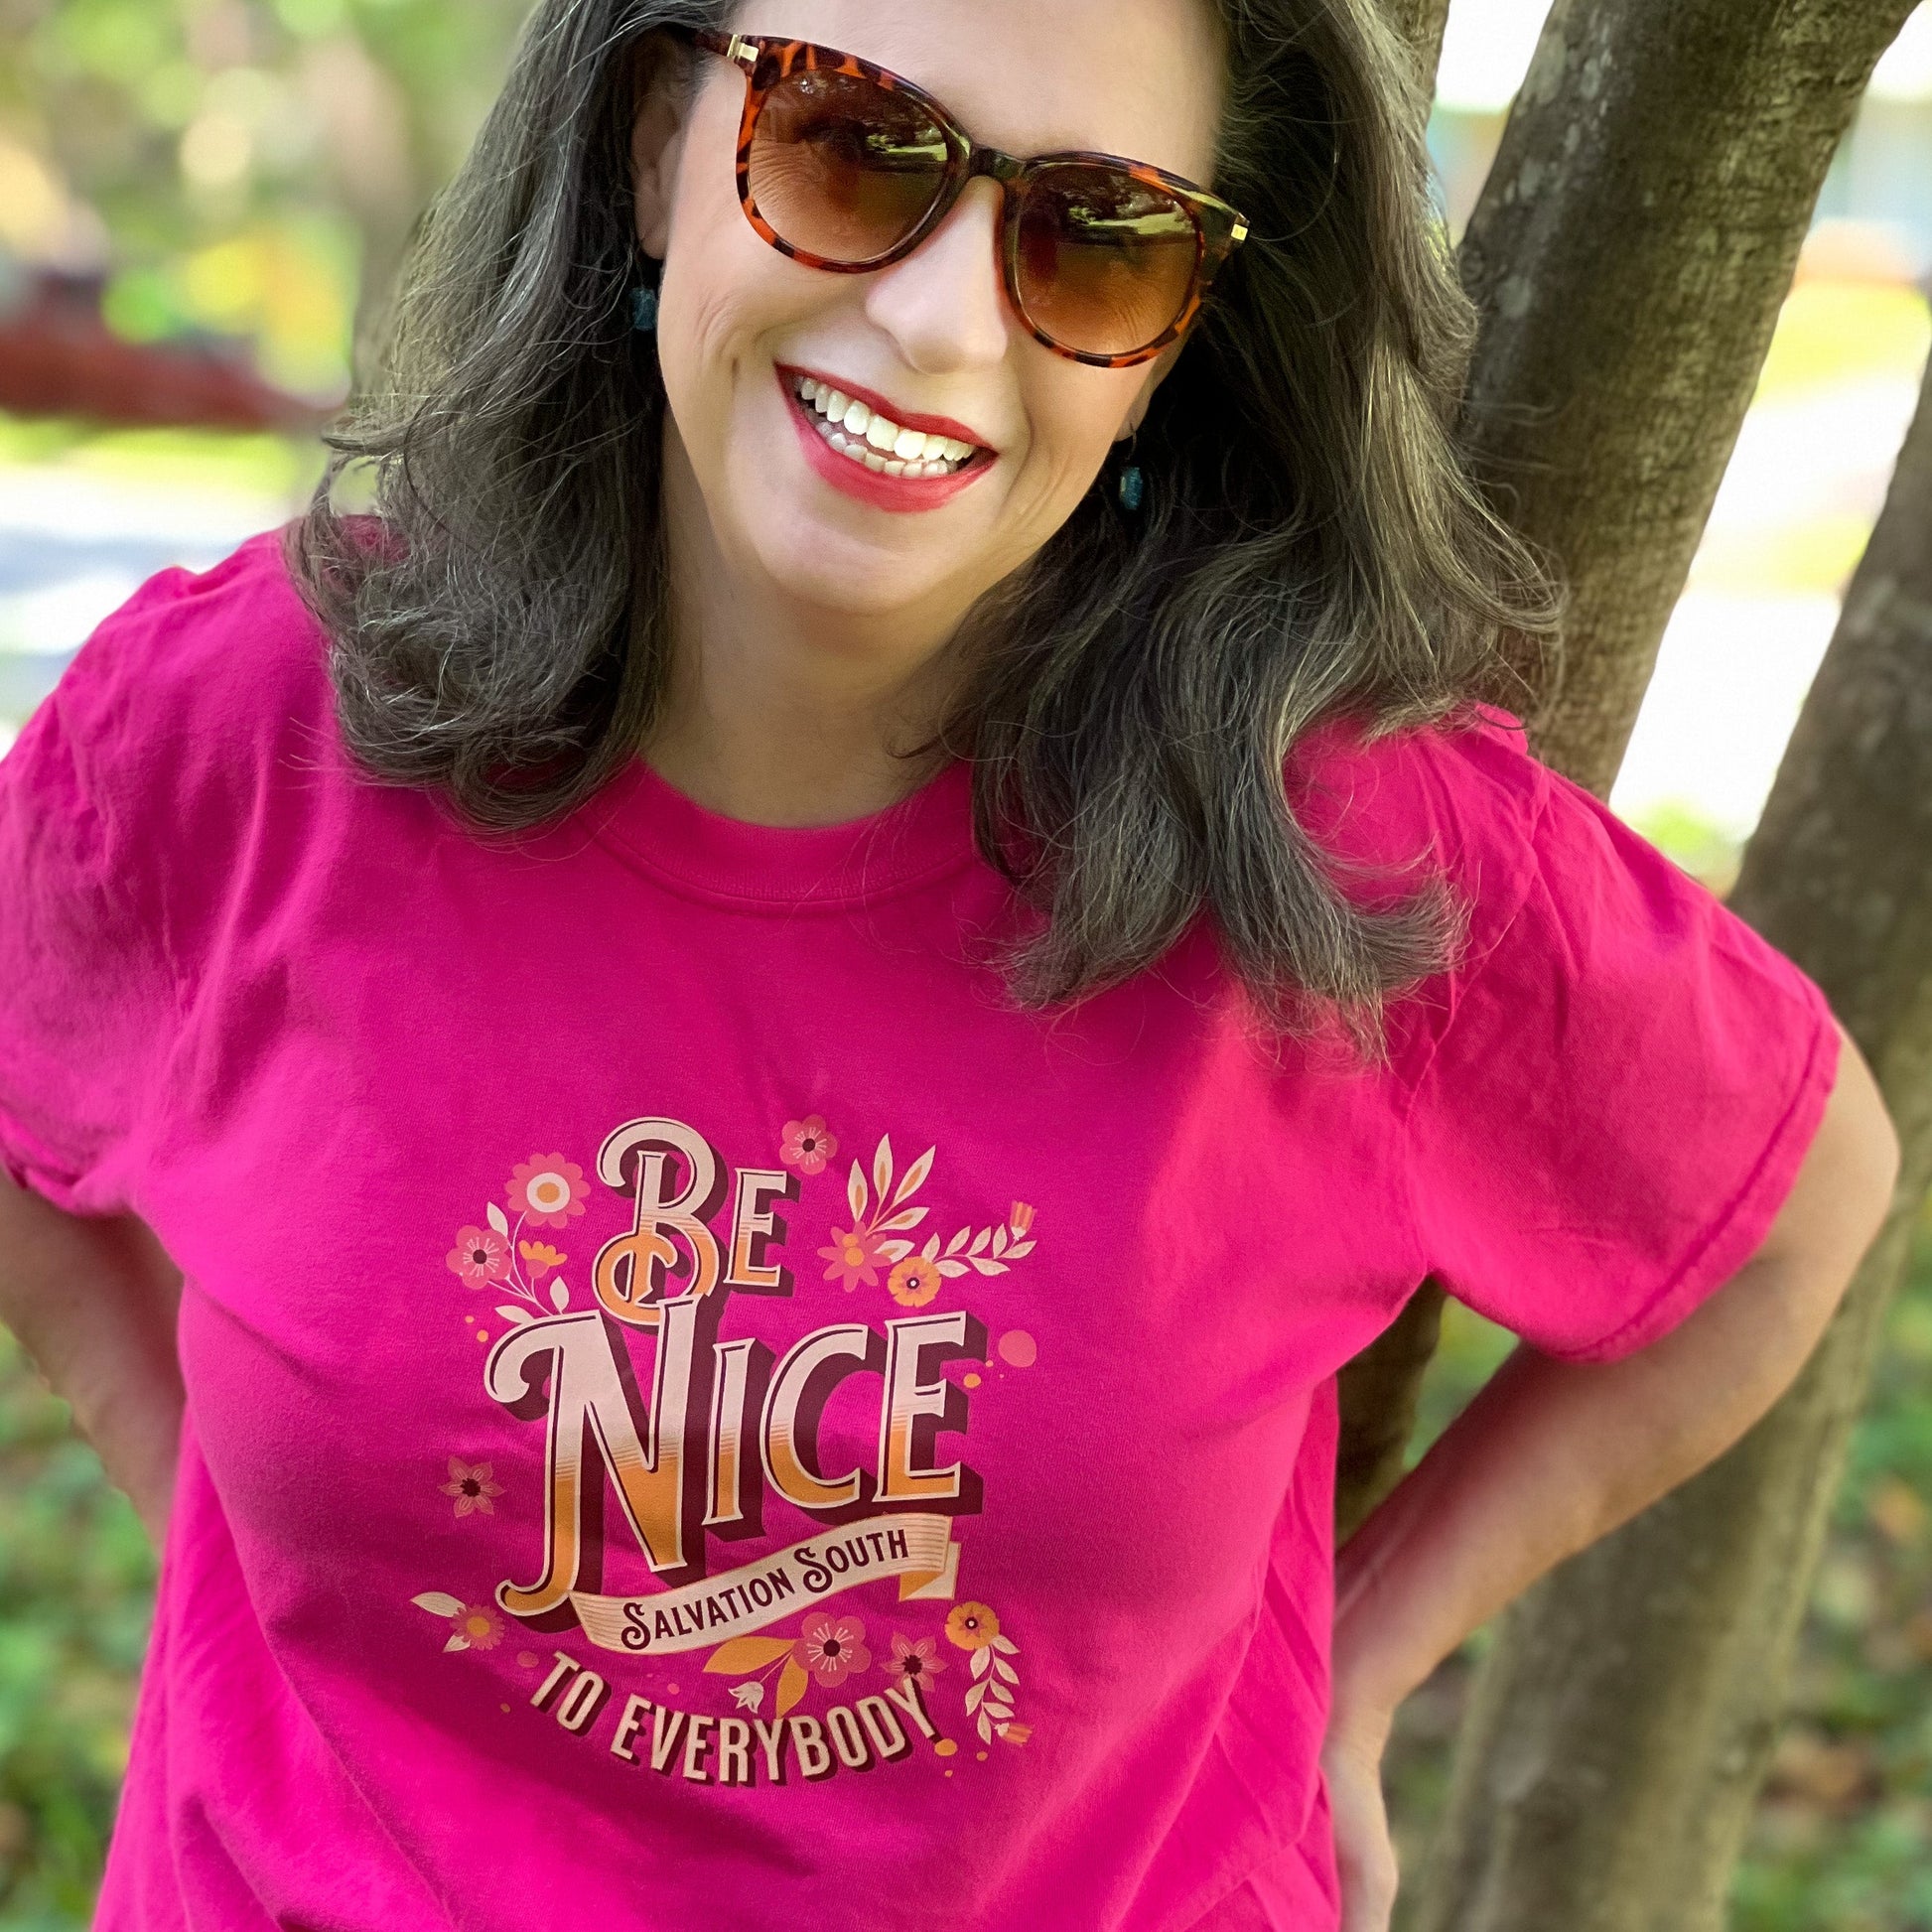 Salvation South - The Be Nice To Everybody T-shirt - Pink - Stacy Reece